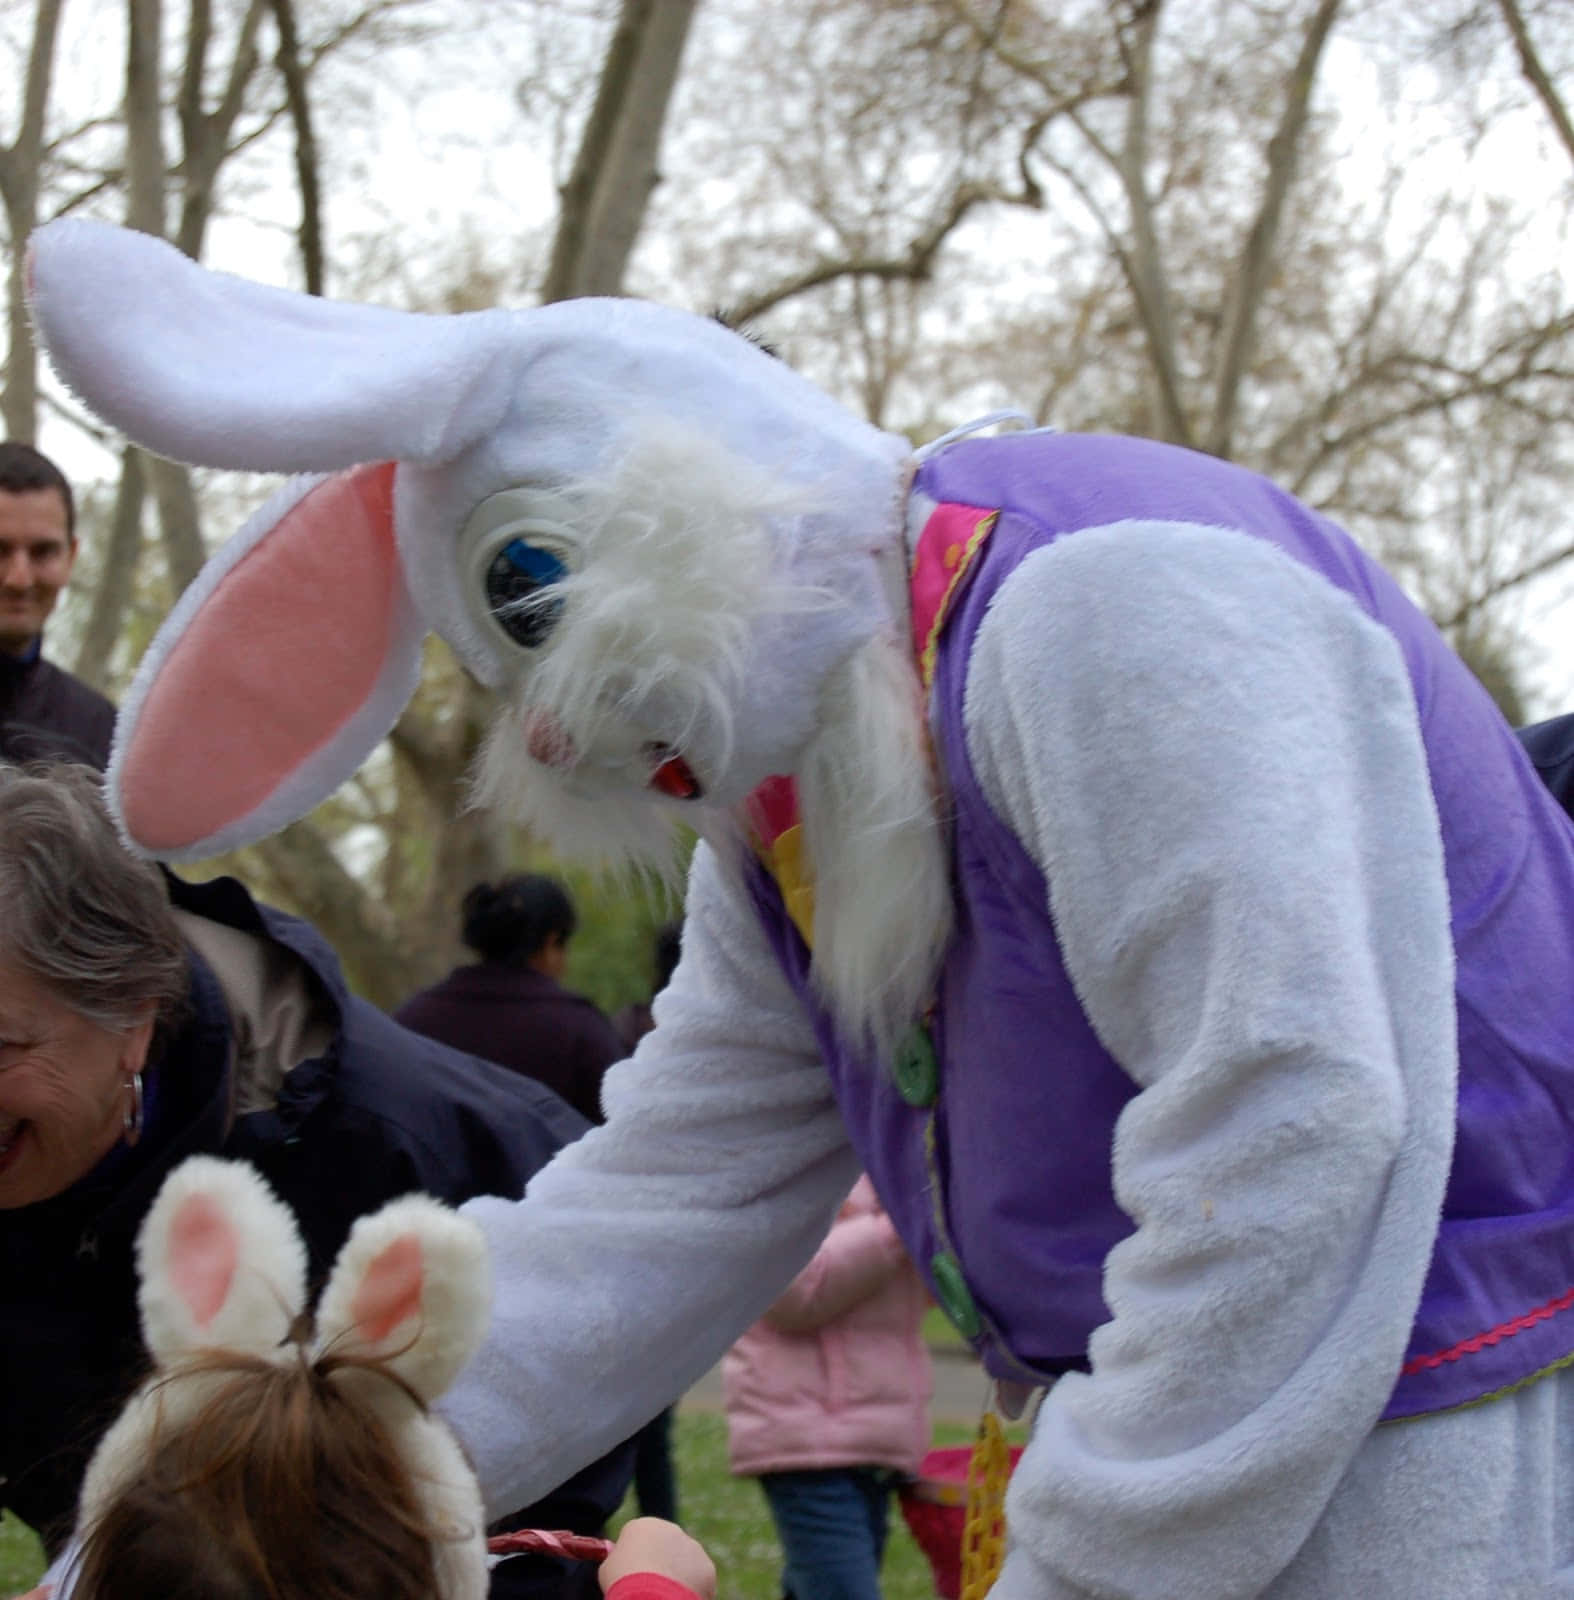 Beware Of The |Creepy Easter Bunny|